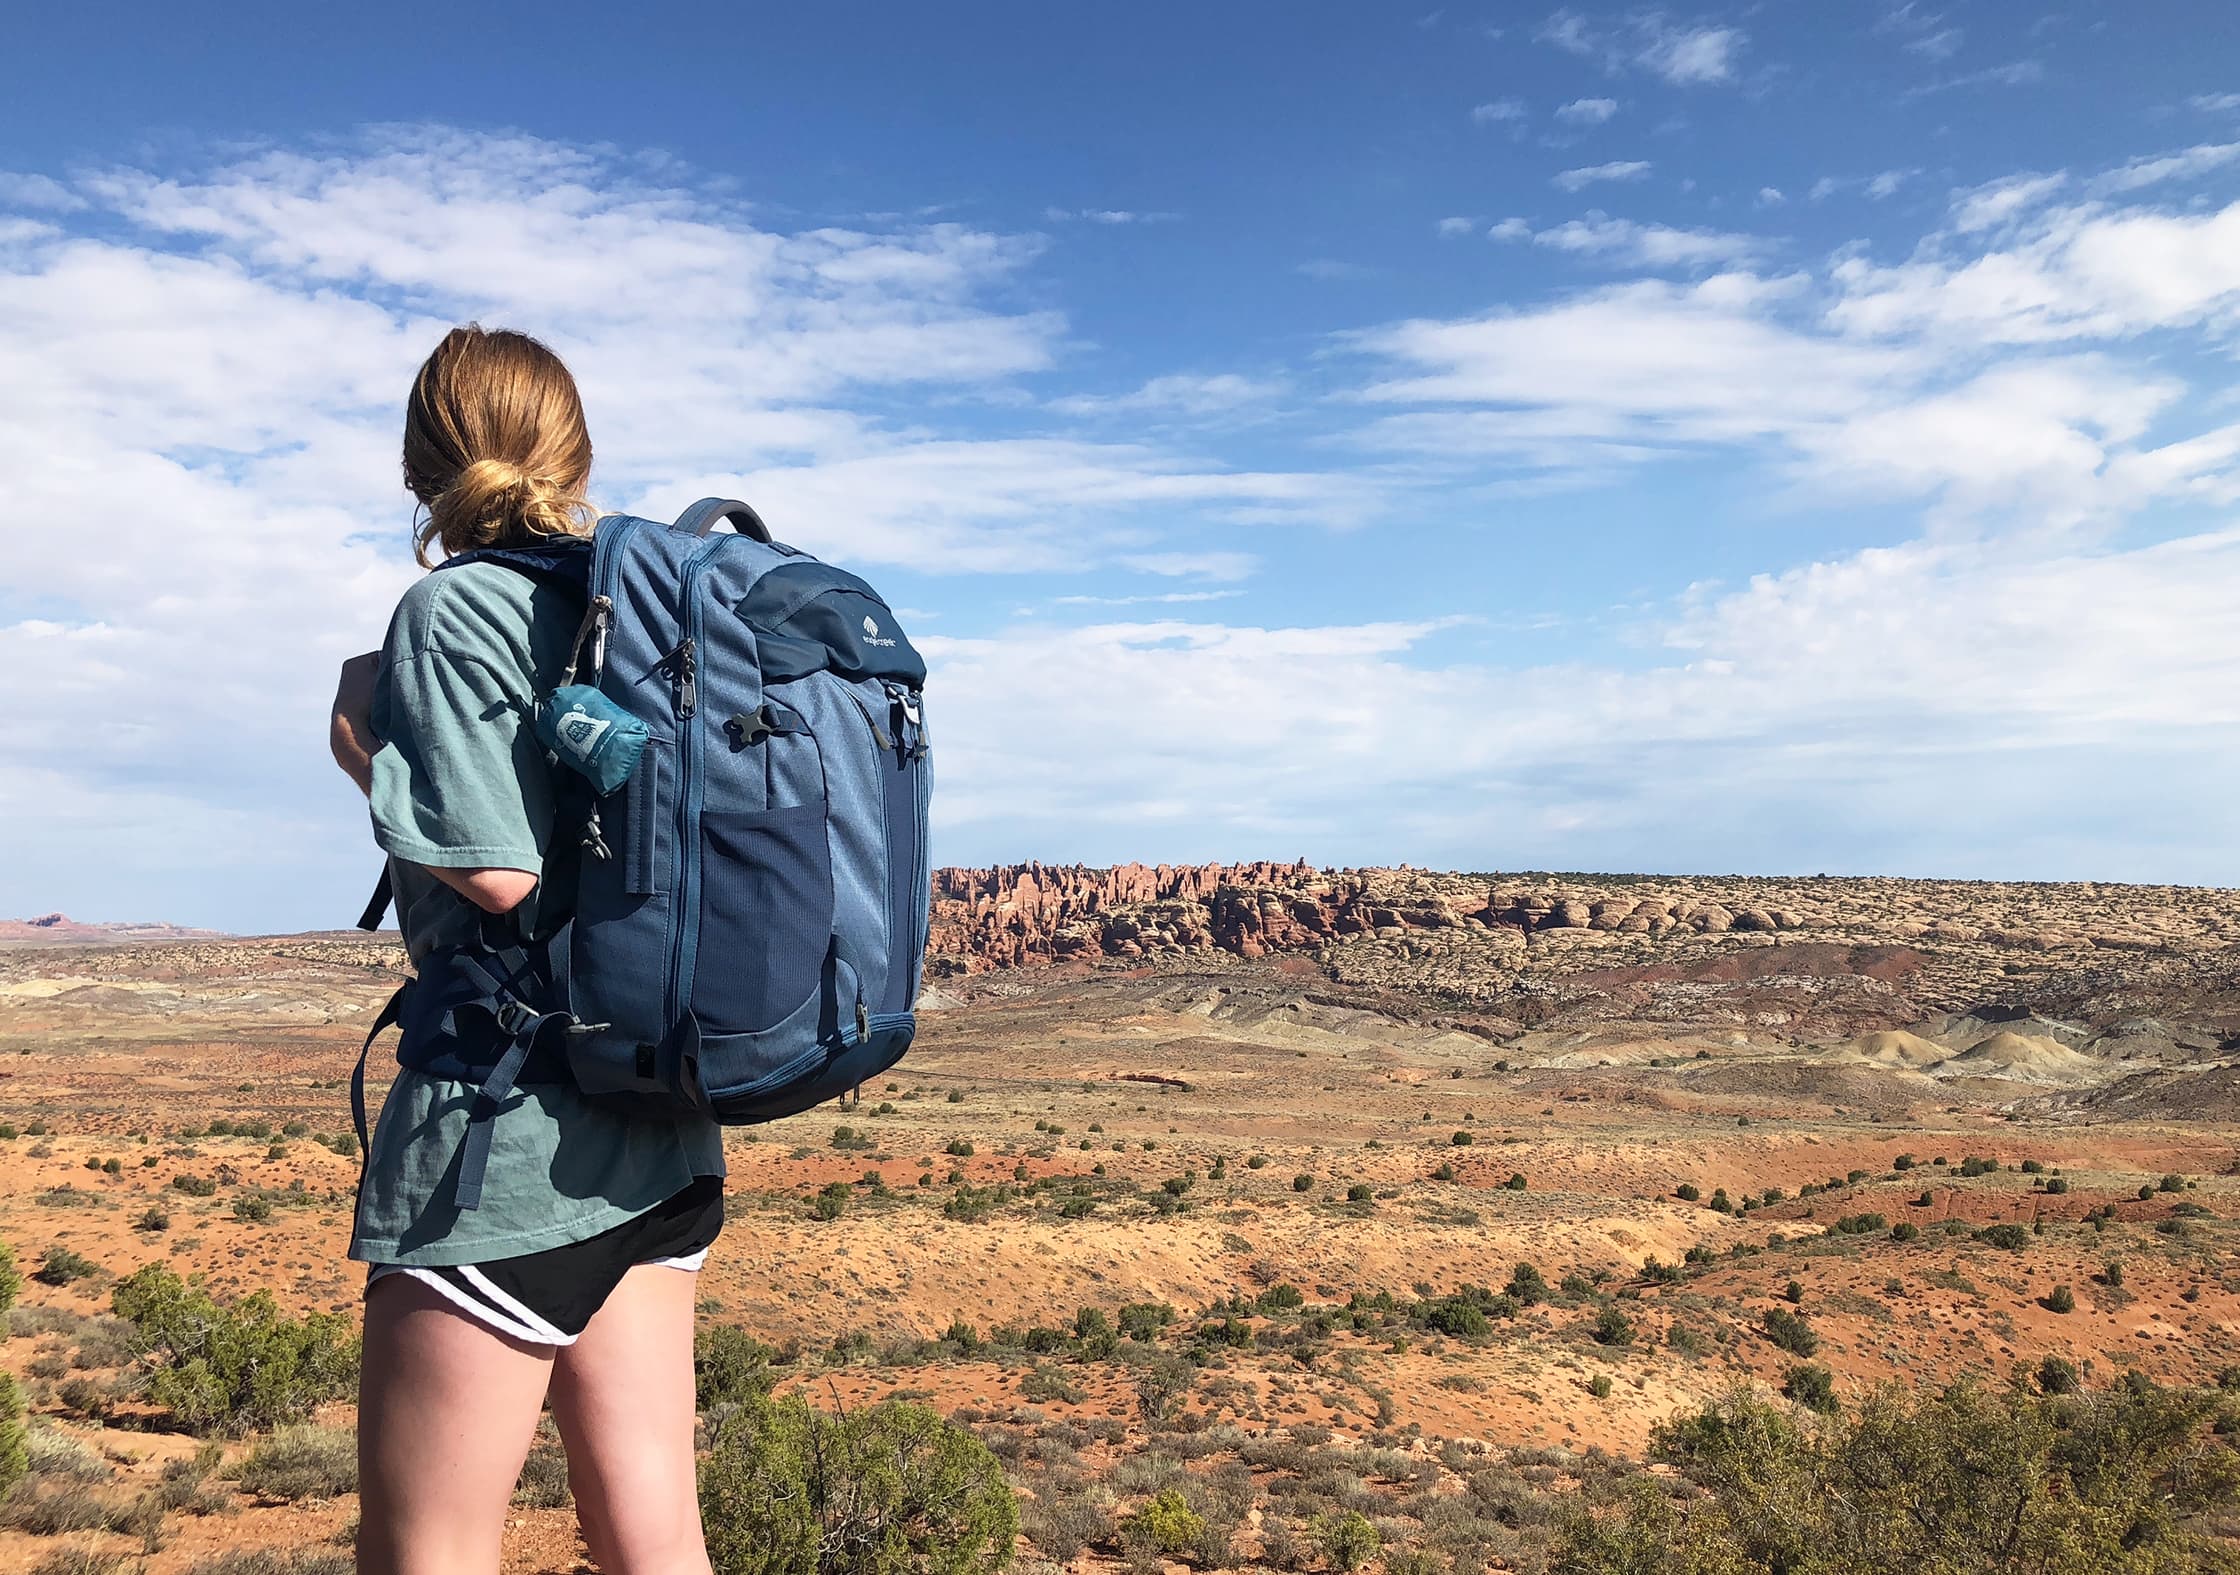 Eagle Creek Global Companion 40L Travel Pack at Arches National Park